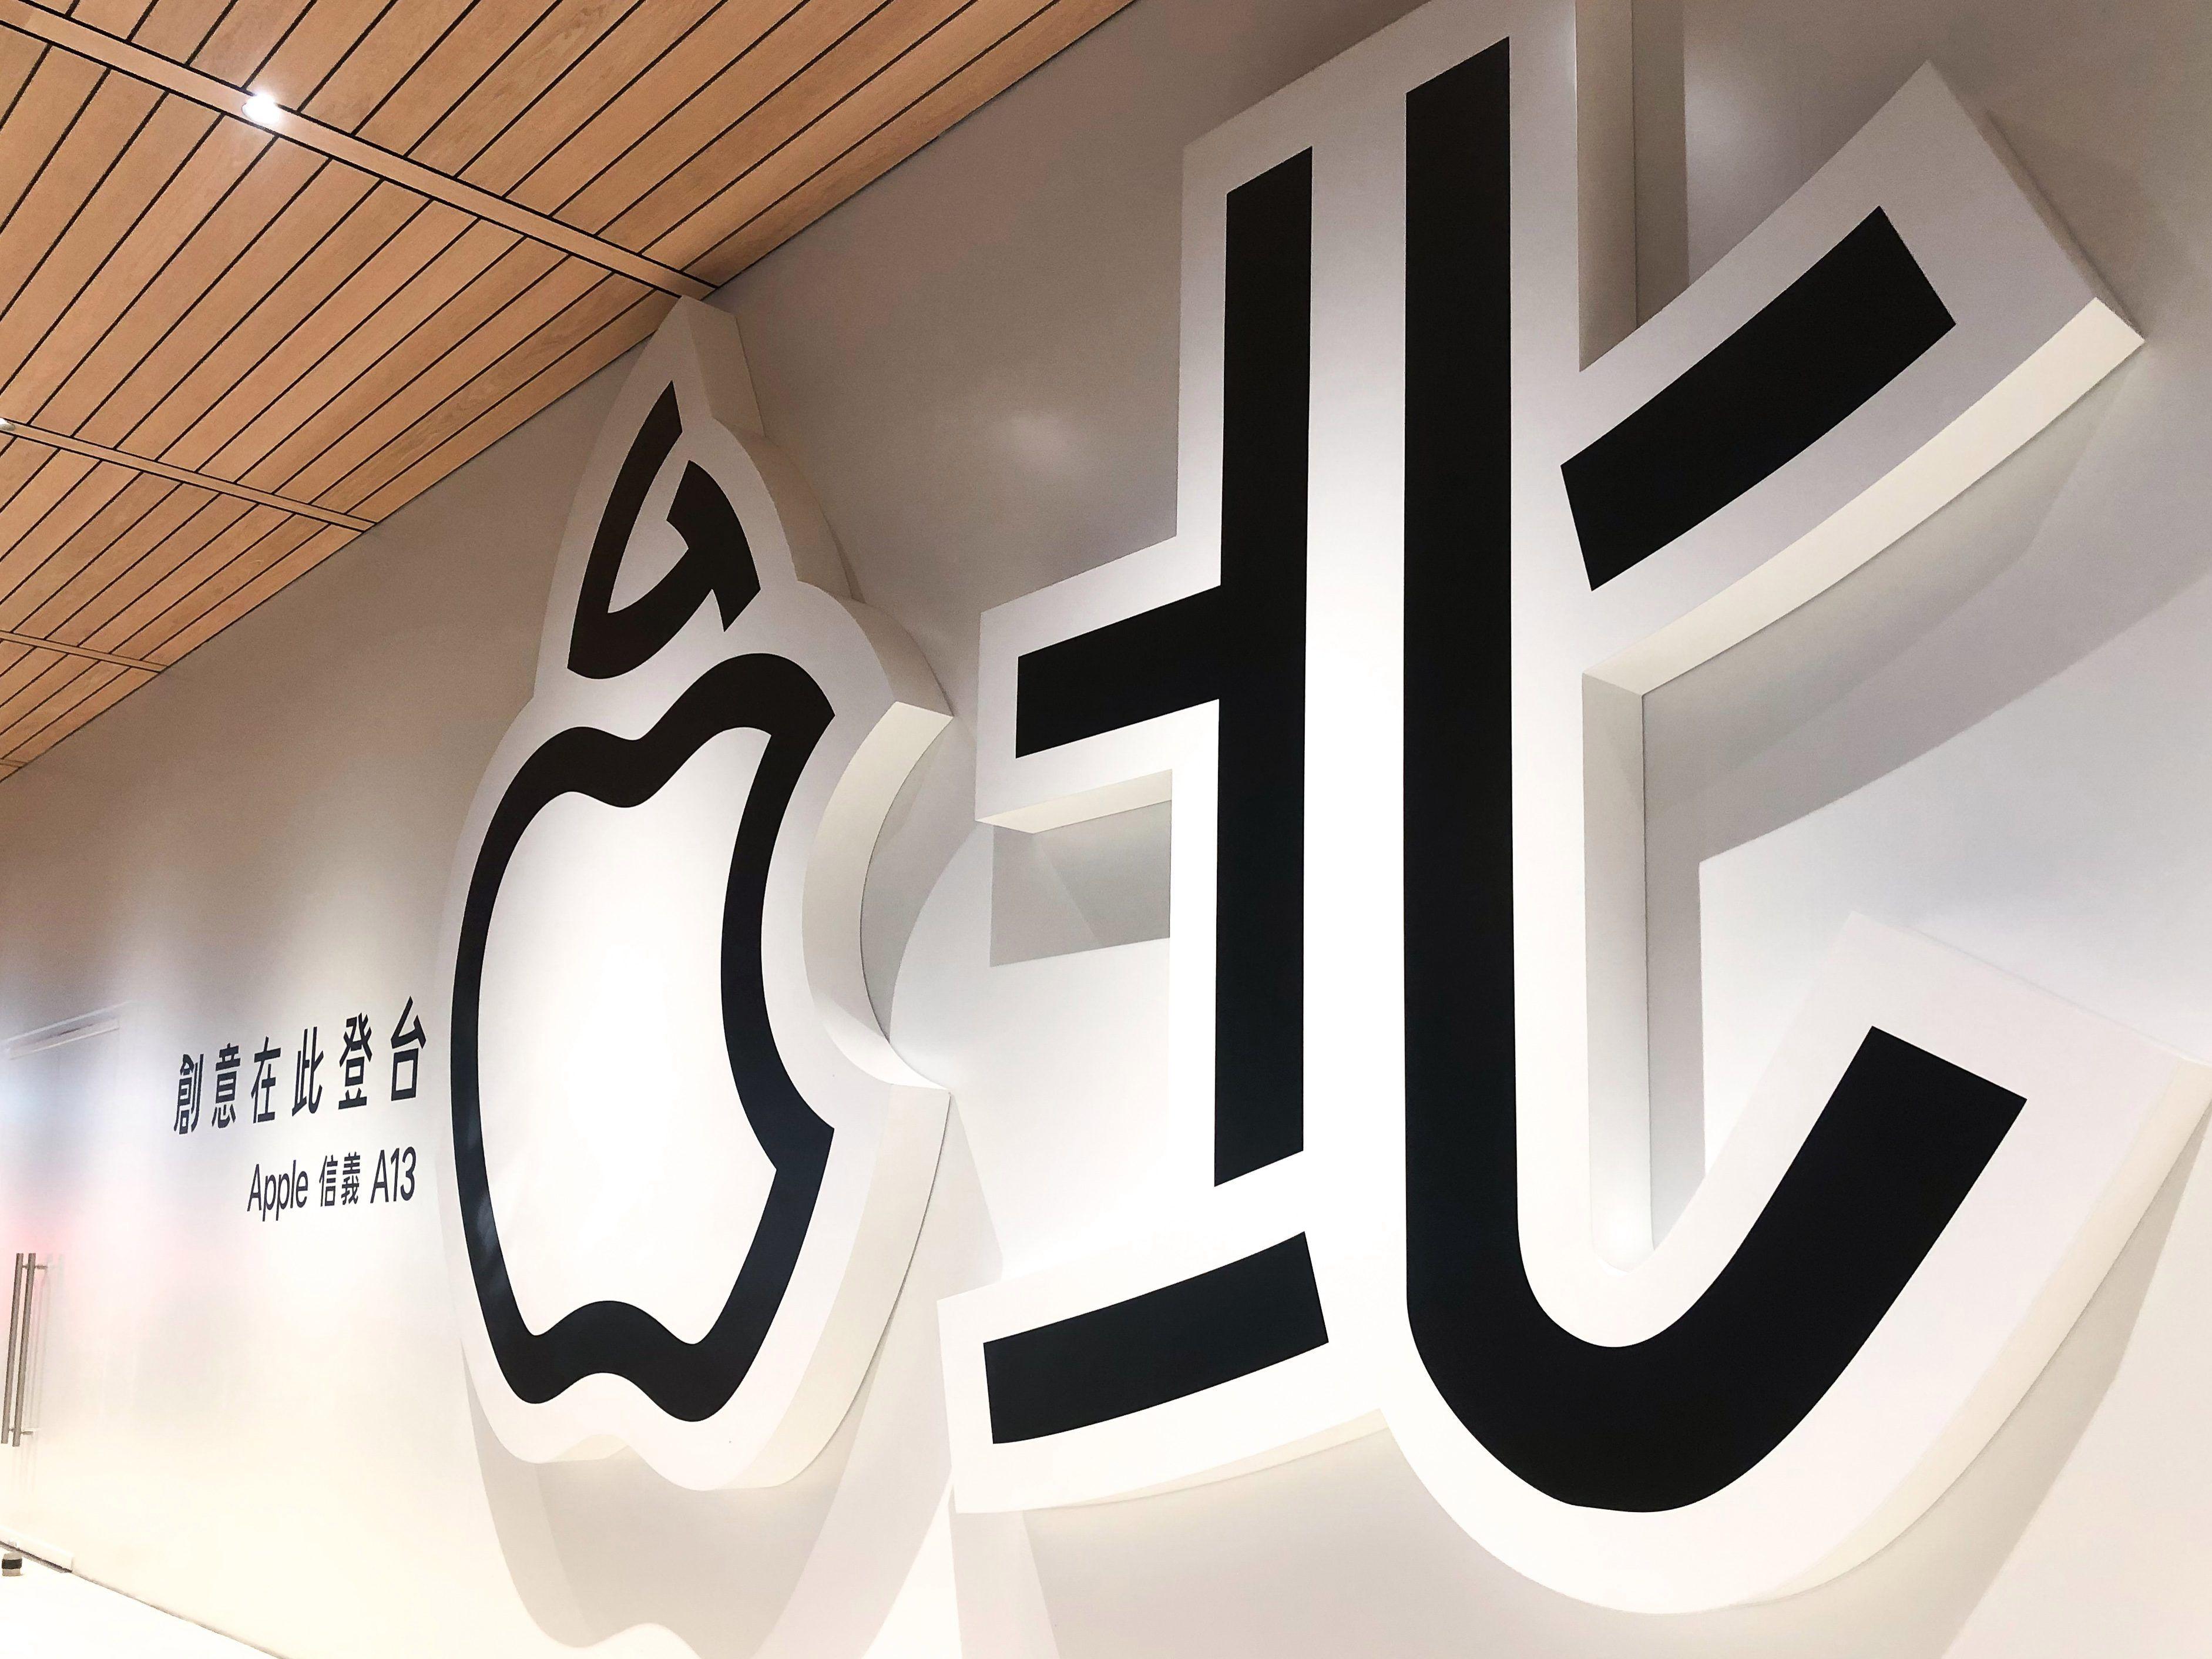 MacStore Logo - Grand opening of Taiwan's second Apple Store set for June 15th - 9to5Mac